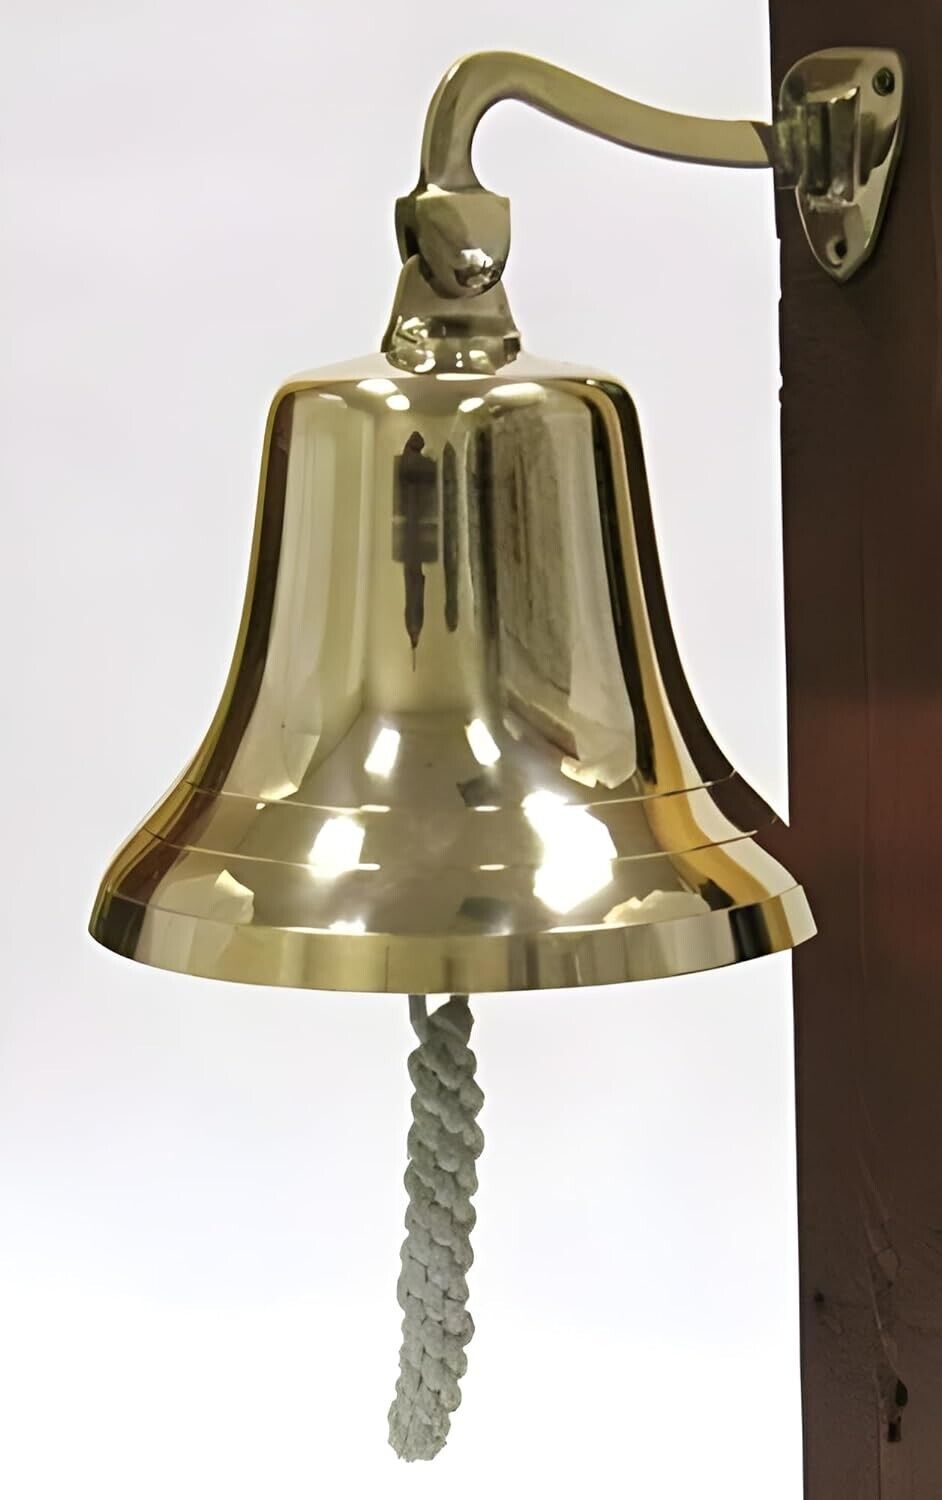 Enormous Wall Hanging Polished Brass Ship Bell w/ Rope Mounting Hardware Bracket